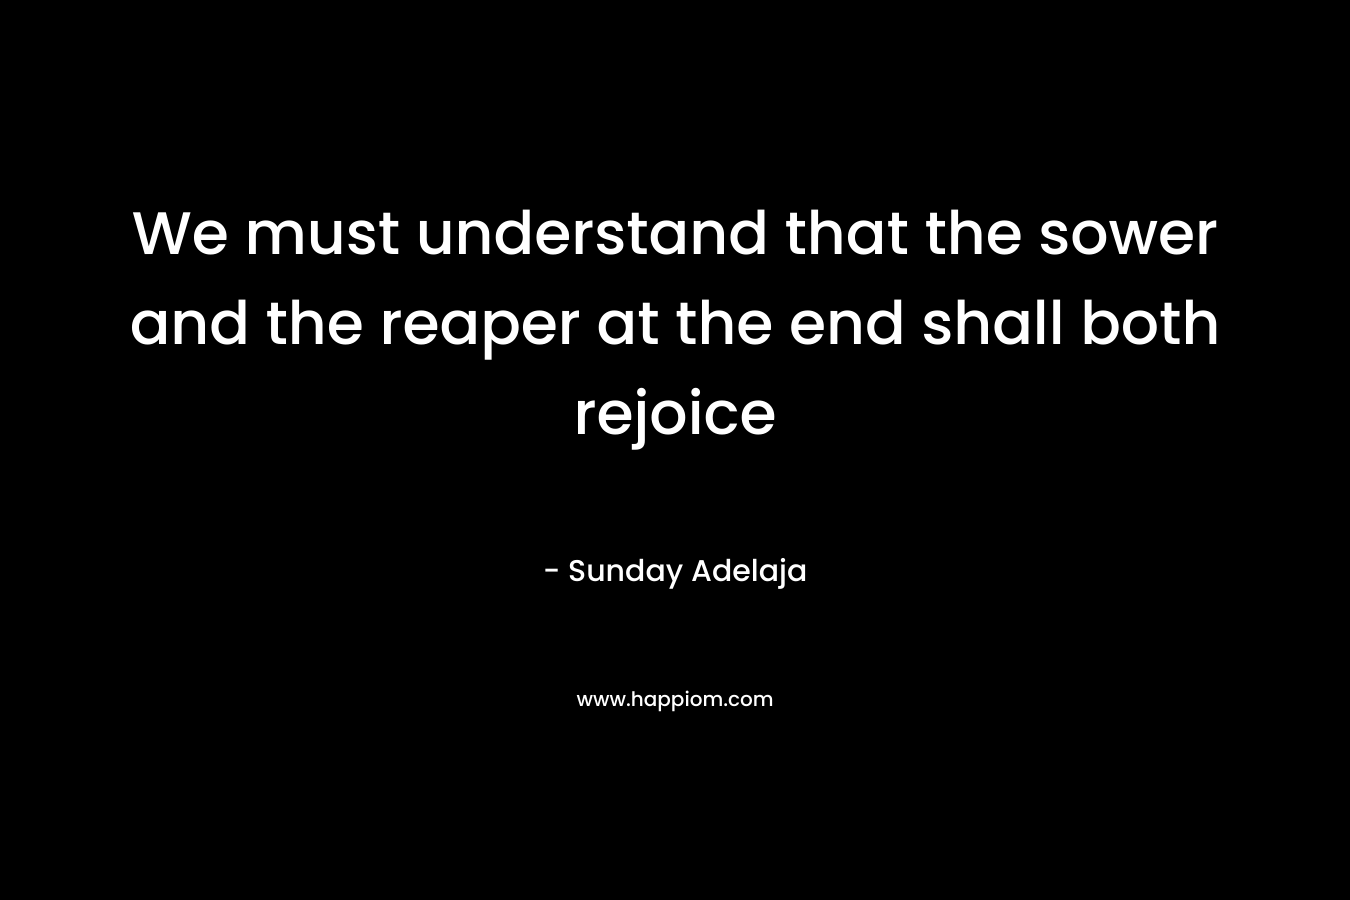 We must understand that the sower and the reaper at the end shall both rejoice – Sunday Adelaja